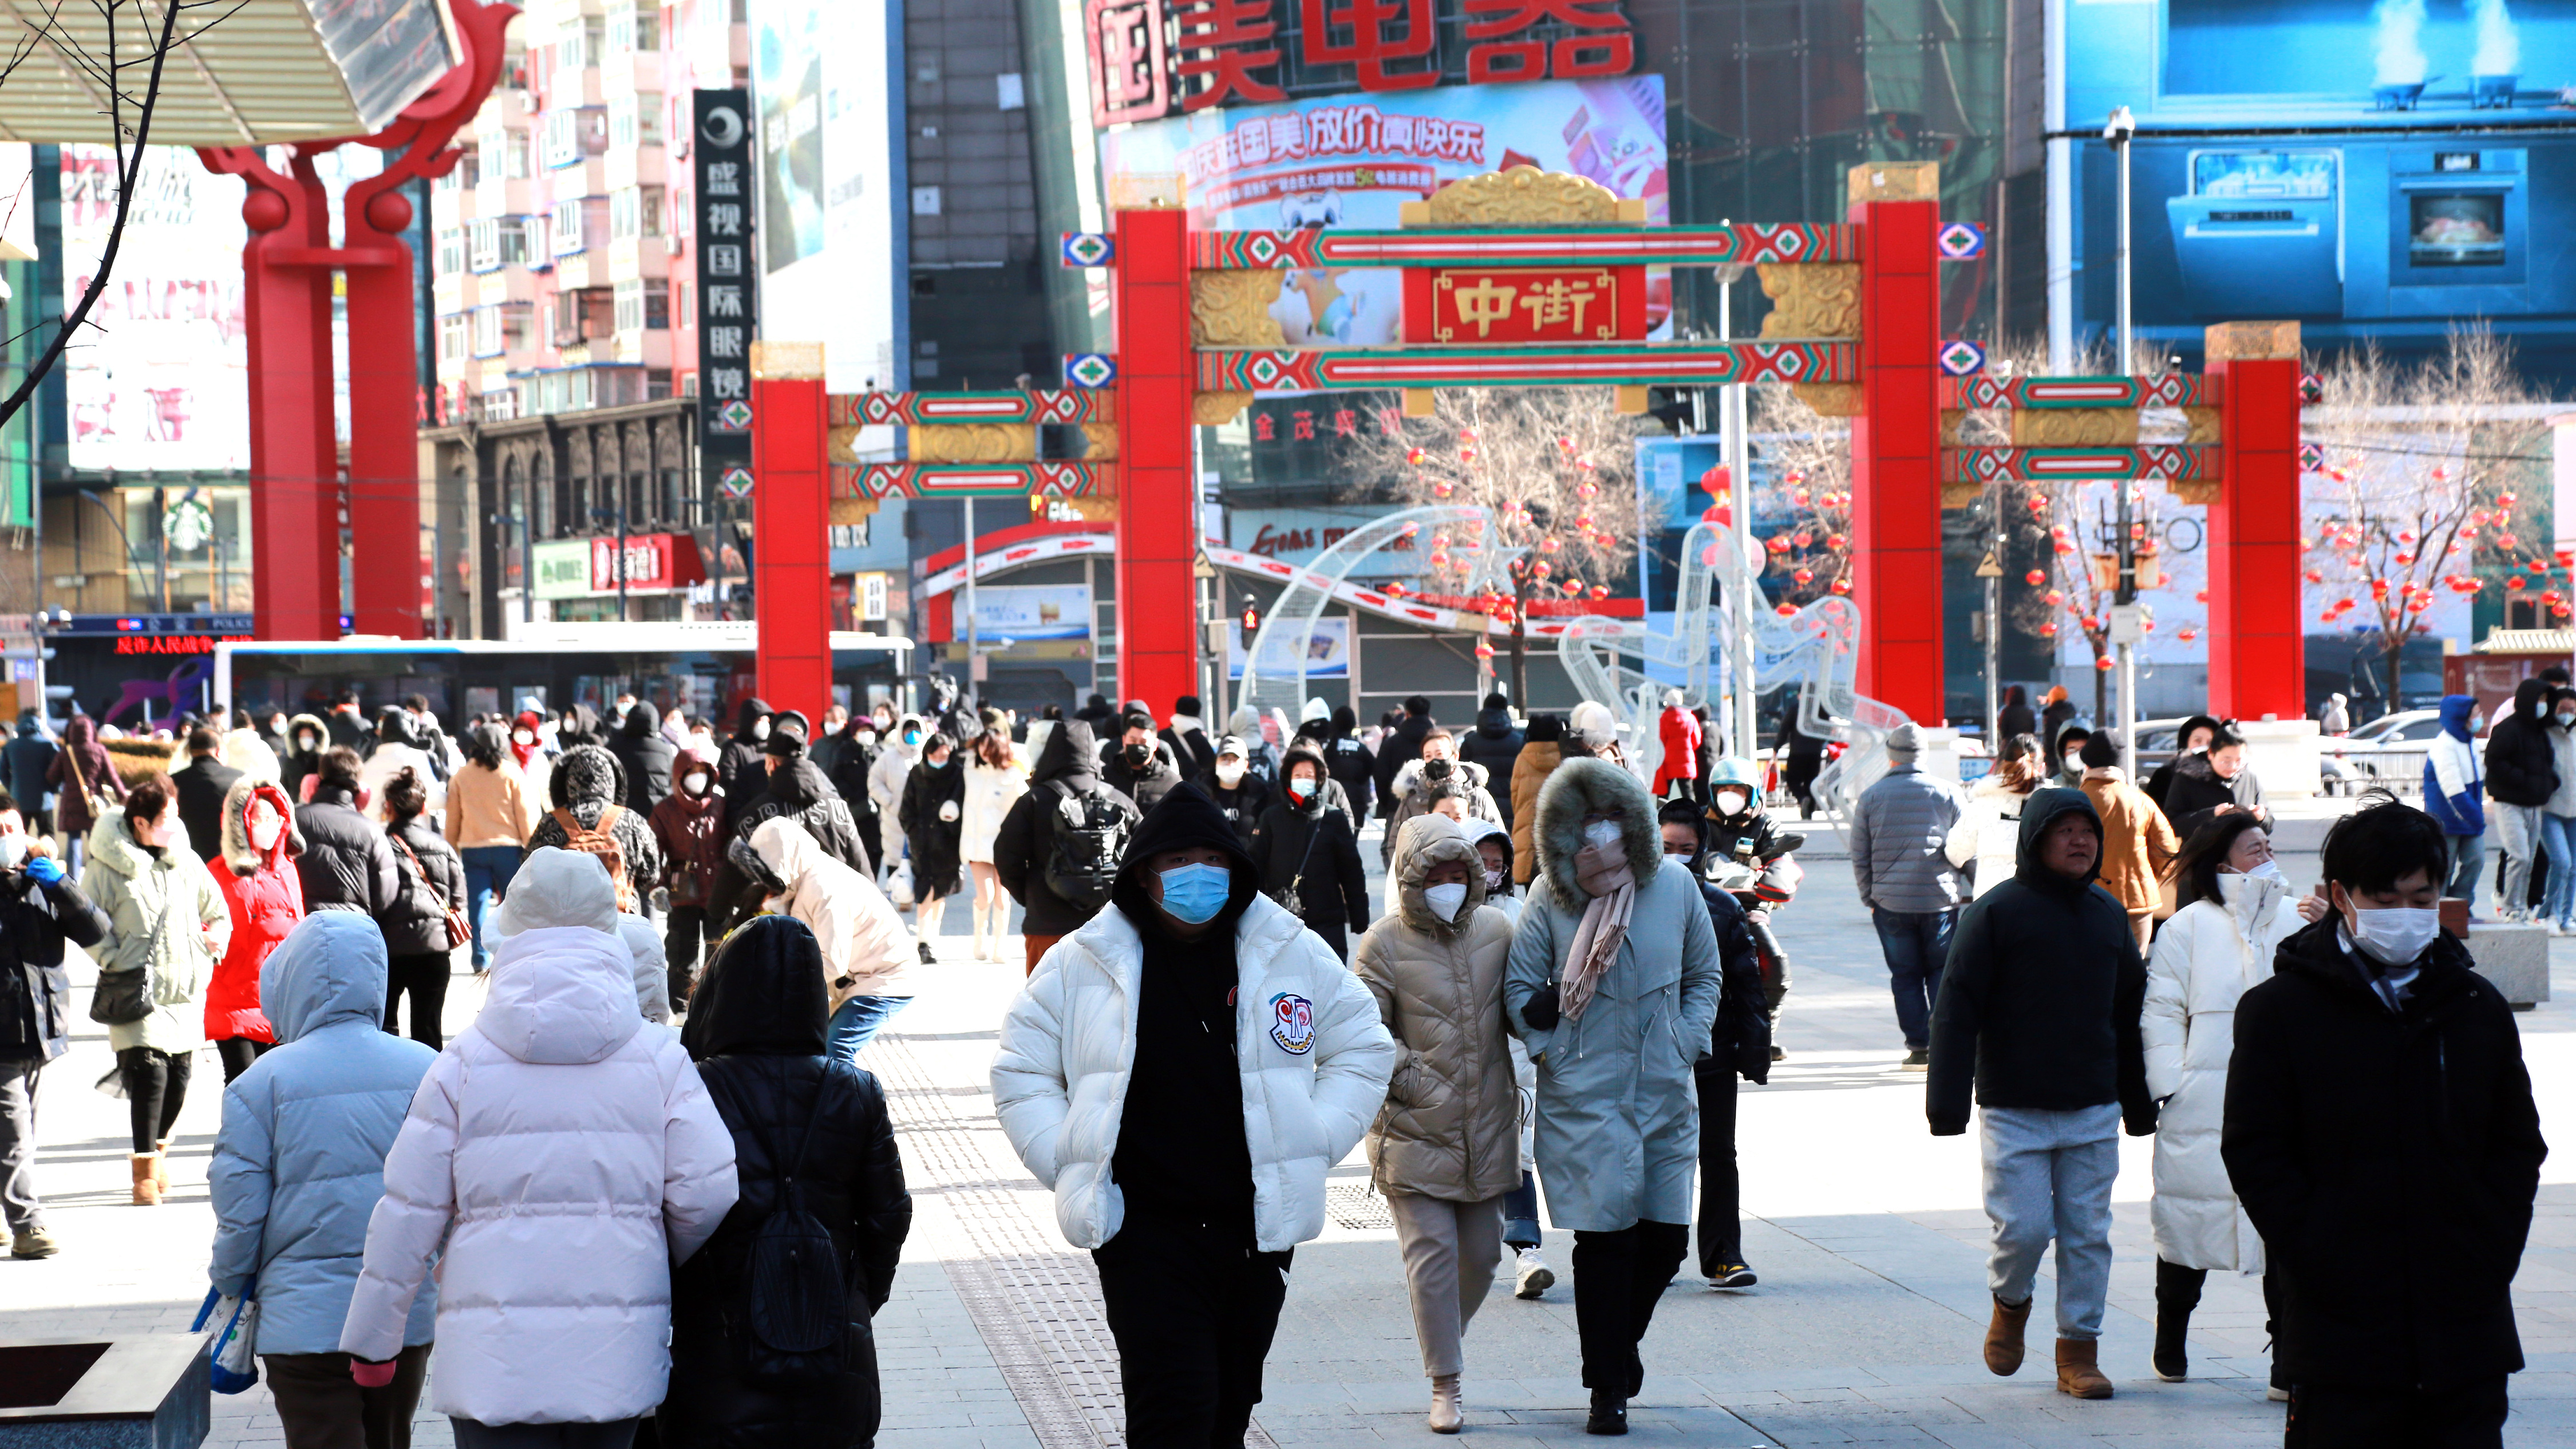 The shopping area is crowded with people in Shenyang, northeast China's Liaoning Province, January 27, 2023. /CFP